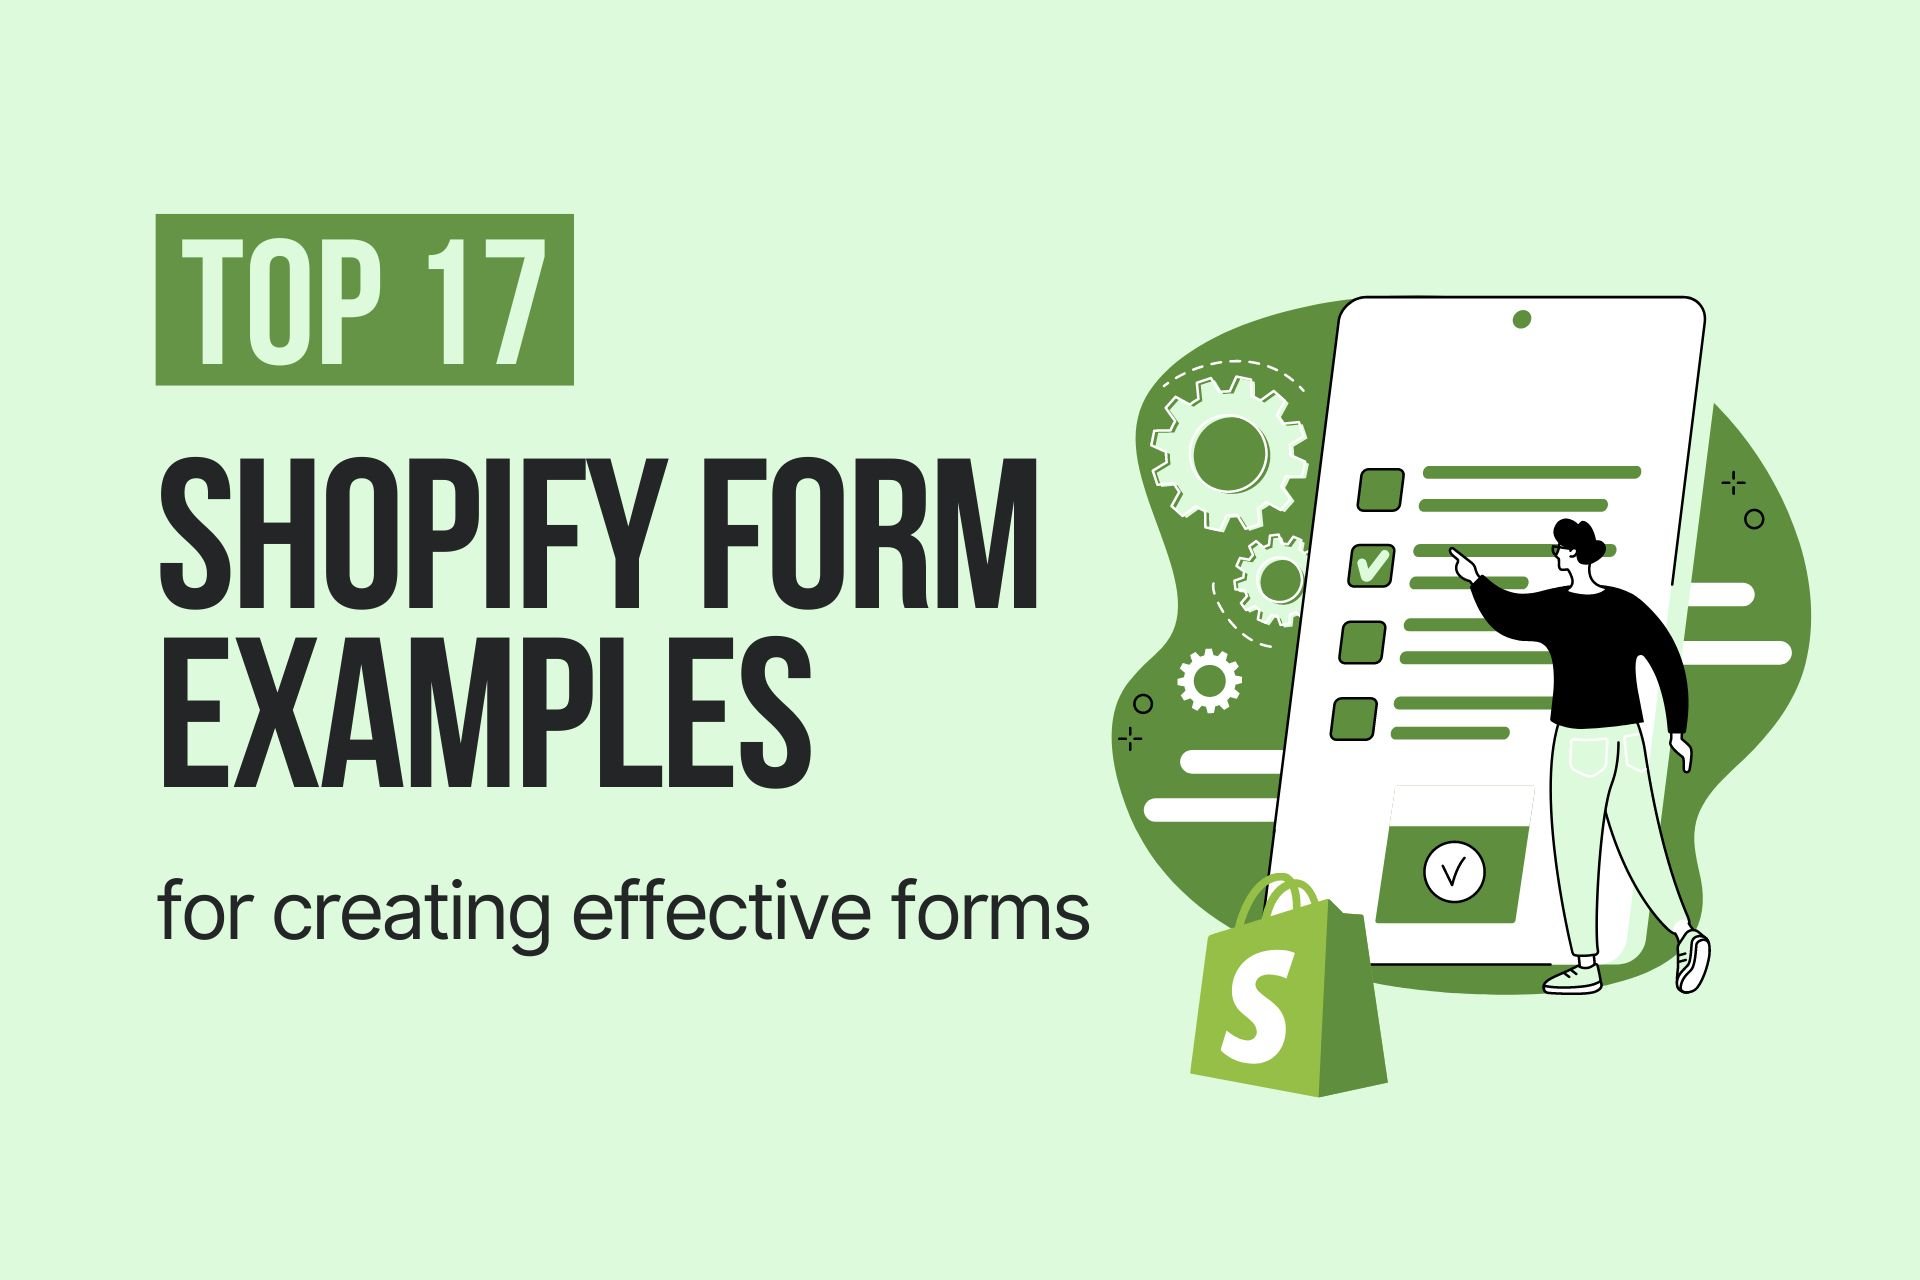 shopify form examples